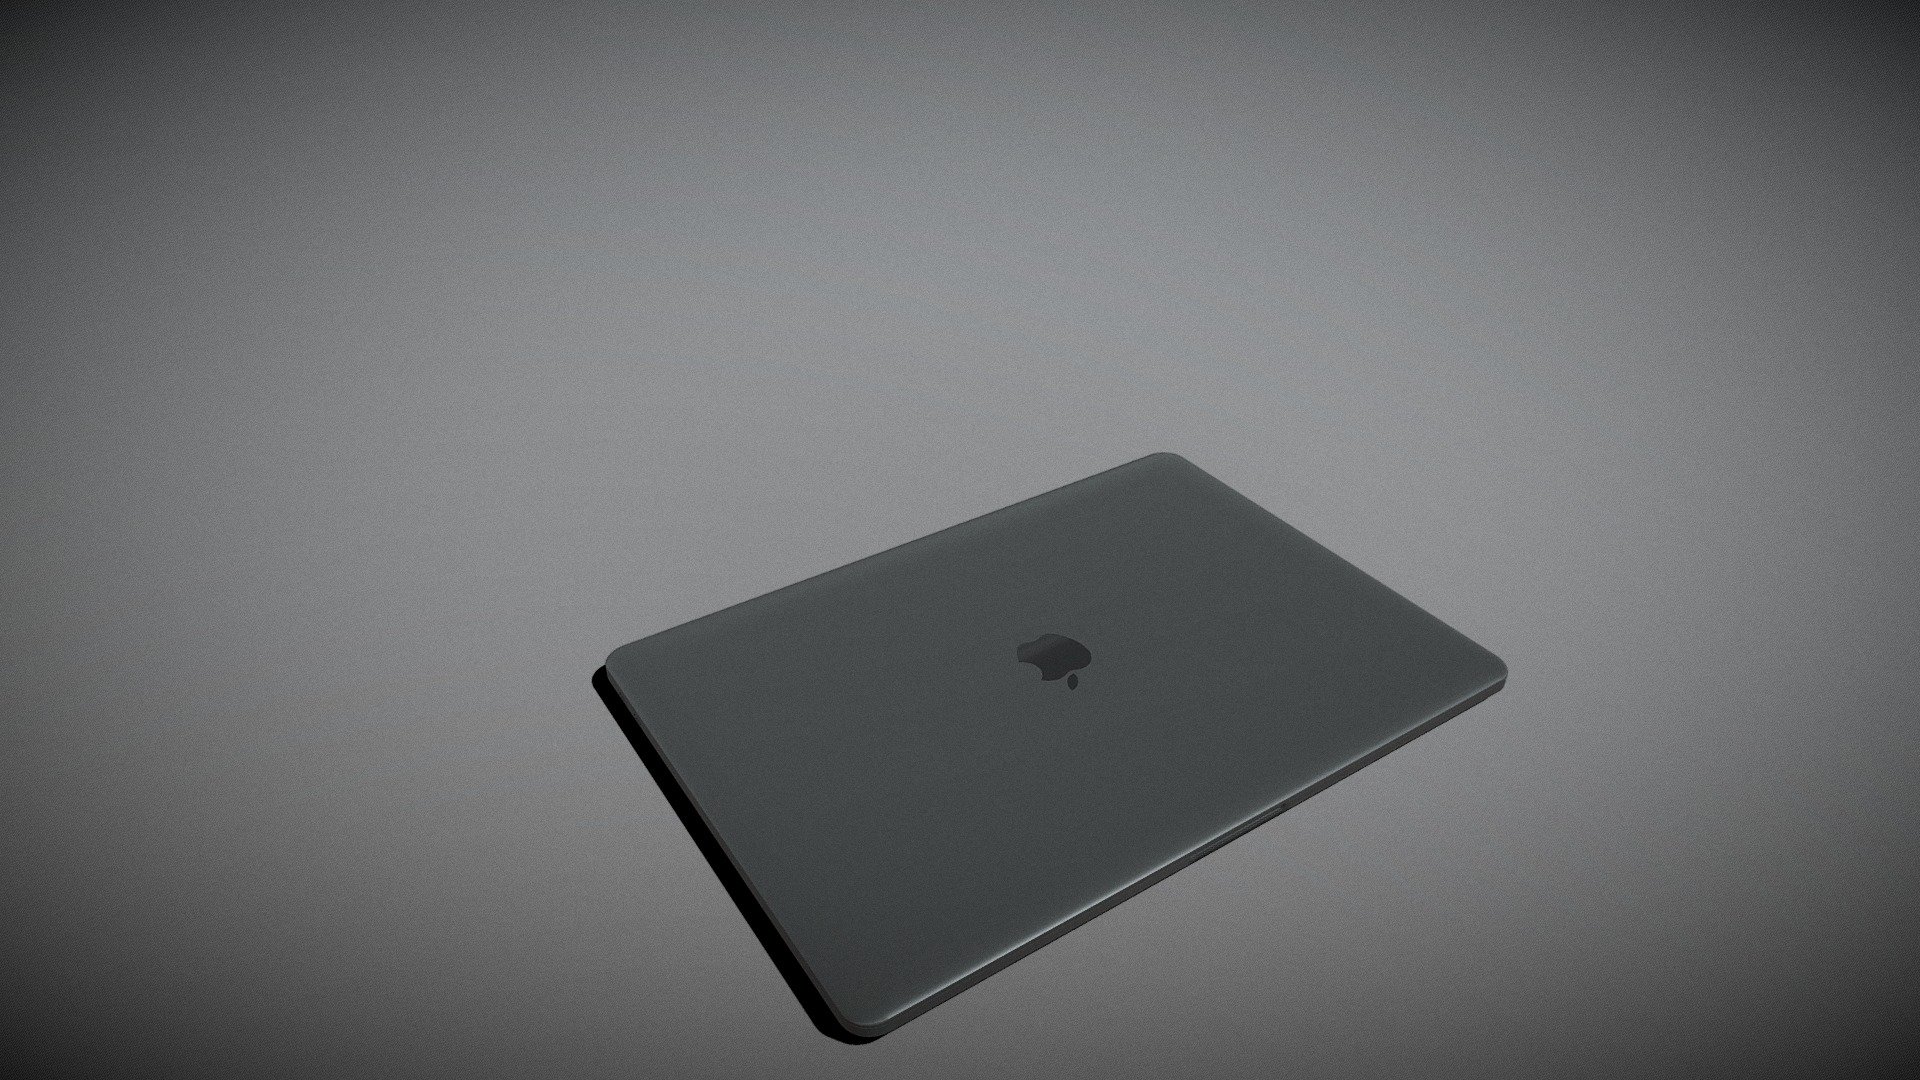 Apple MacBook Pro 13 inch

Modelled in Blender 2.91

* This model is NOT presented as &ldquo;Game Ready